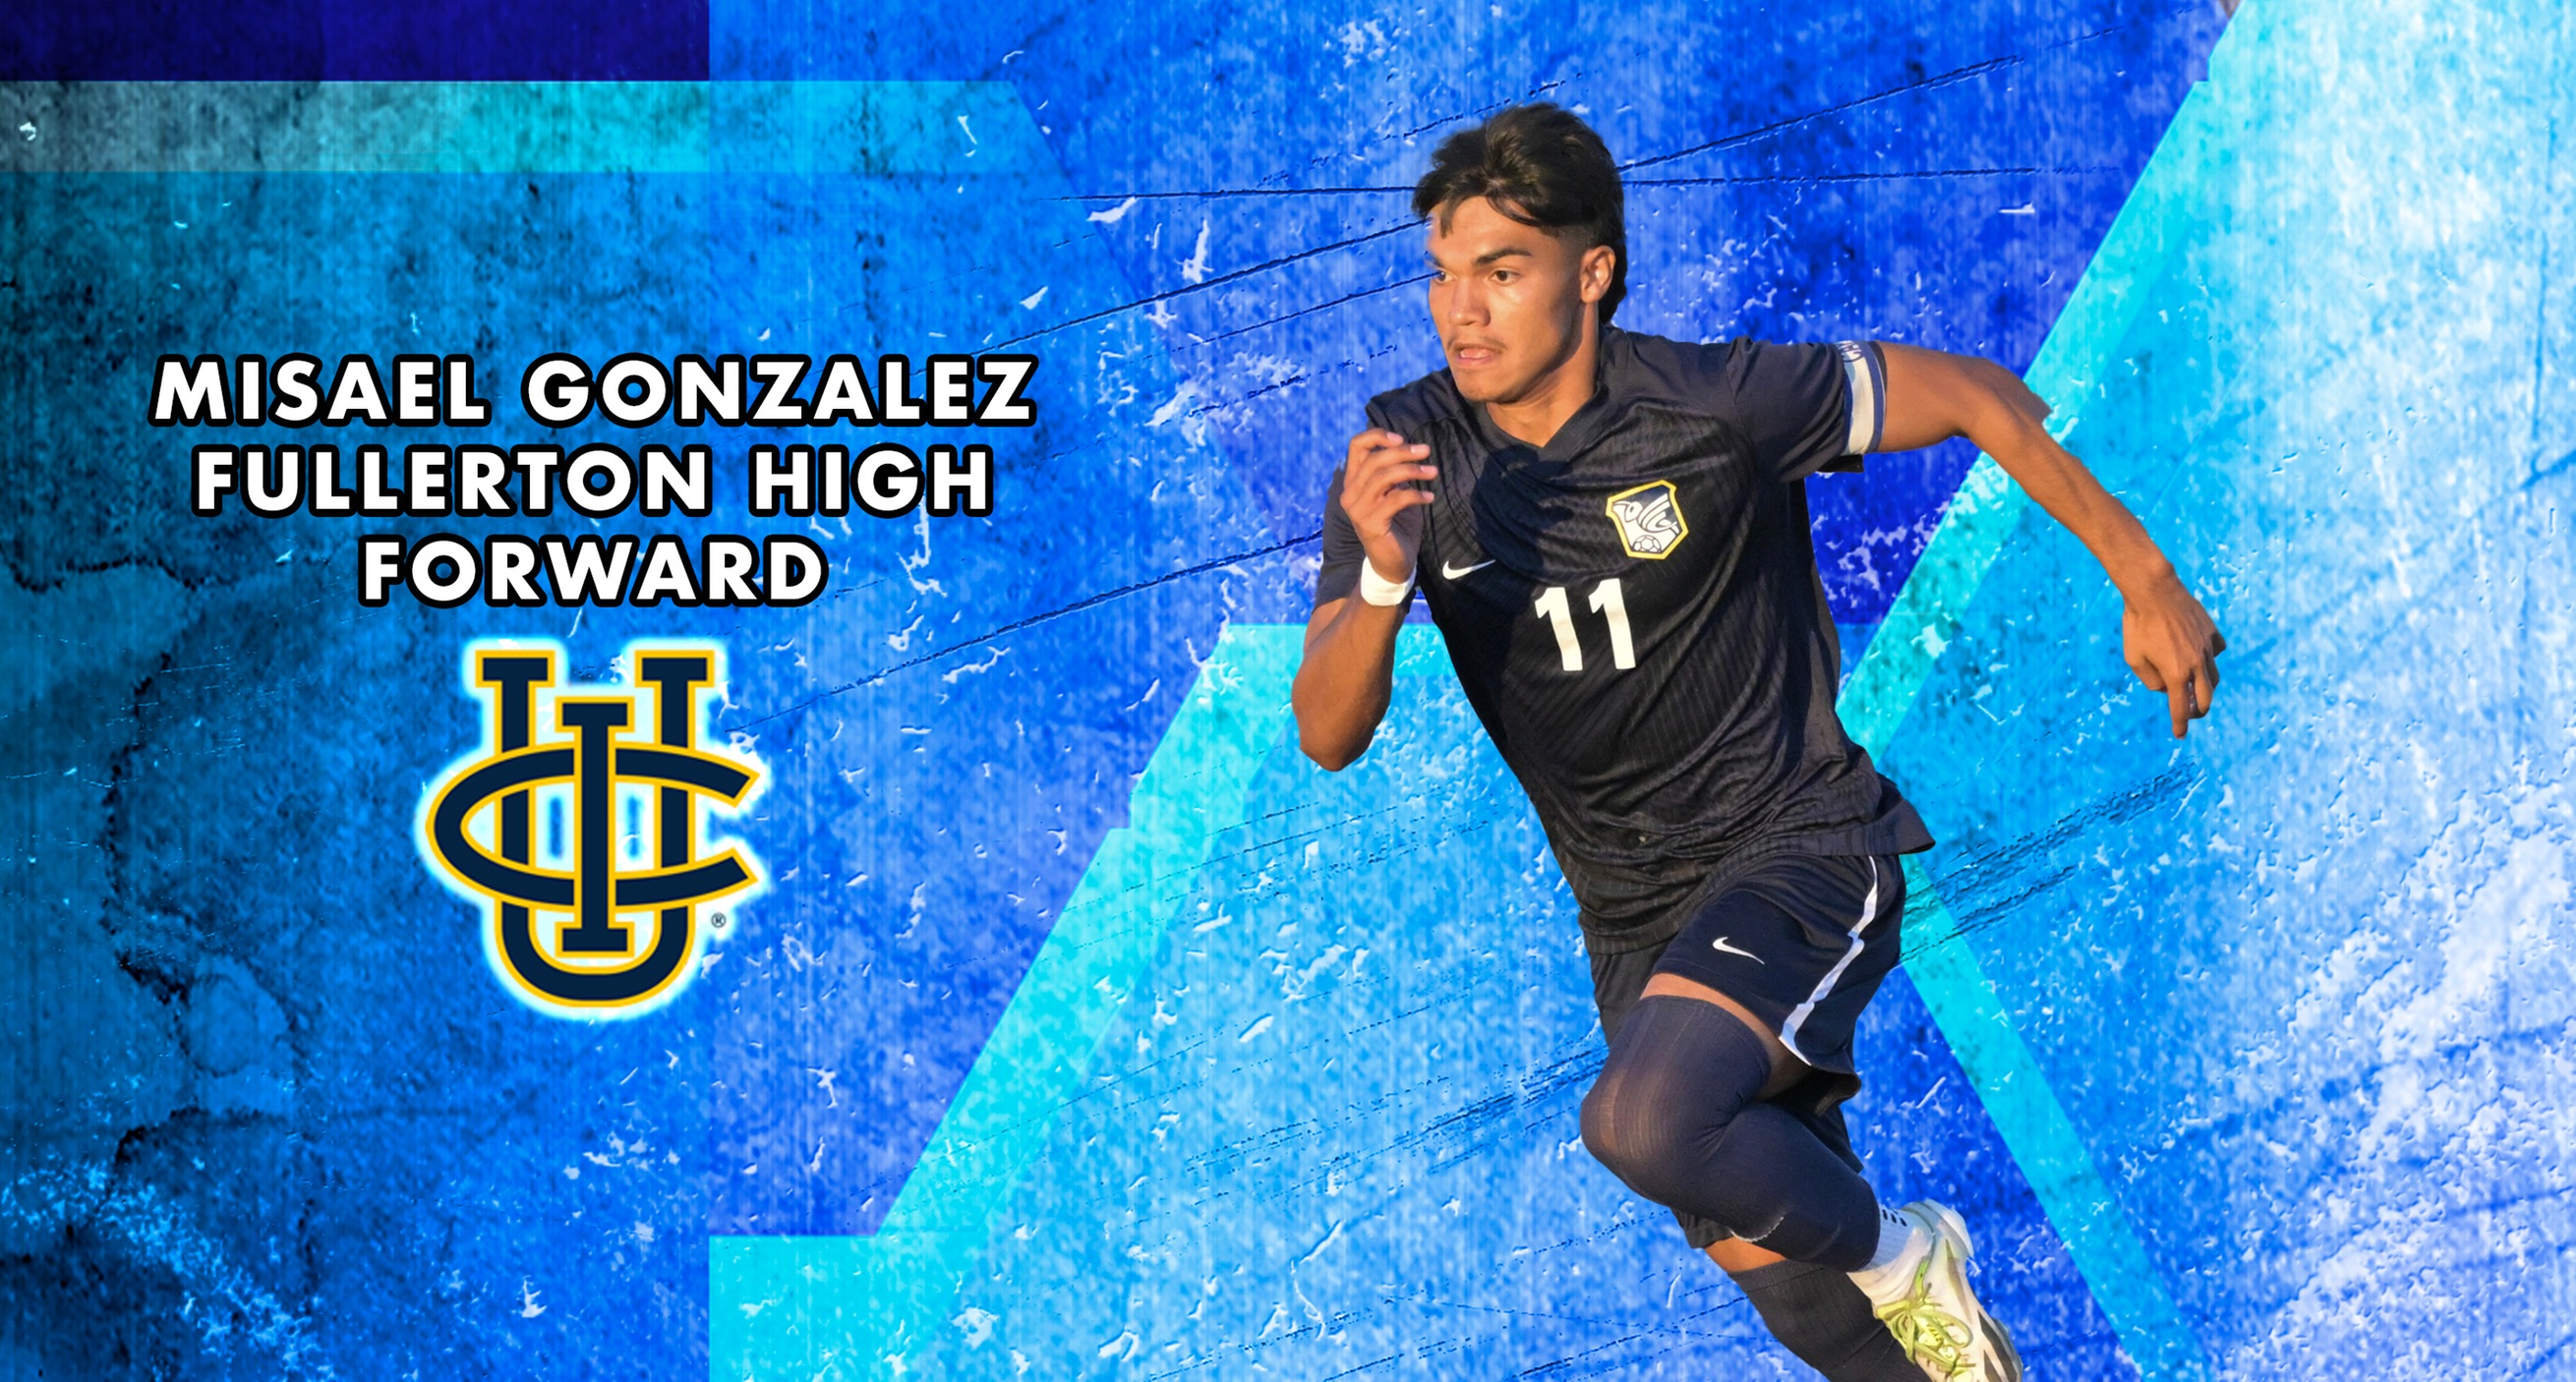 MISEAL GONZALEZ COMMITS TO UCI!